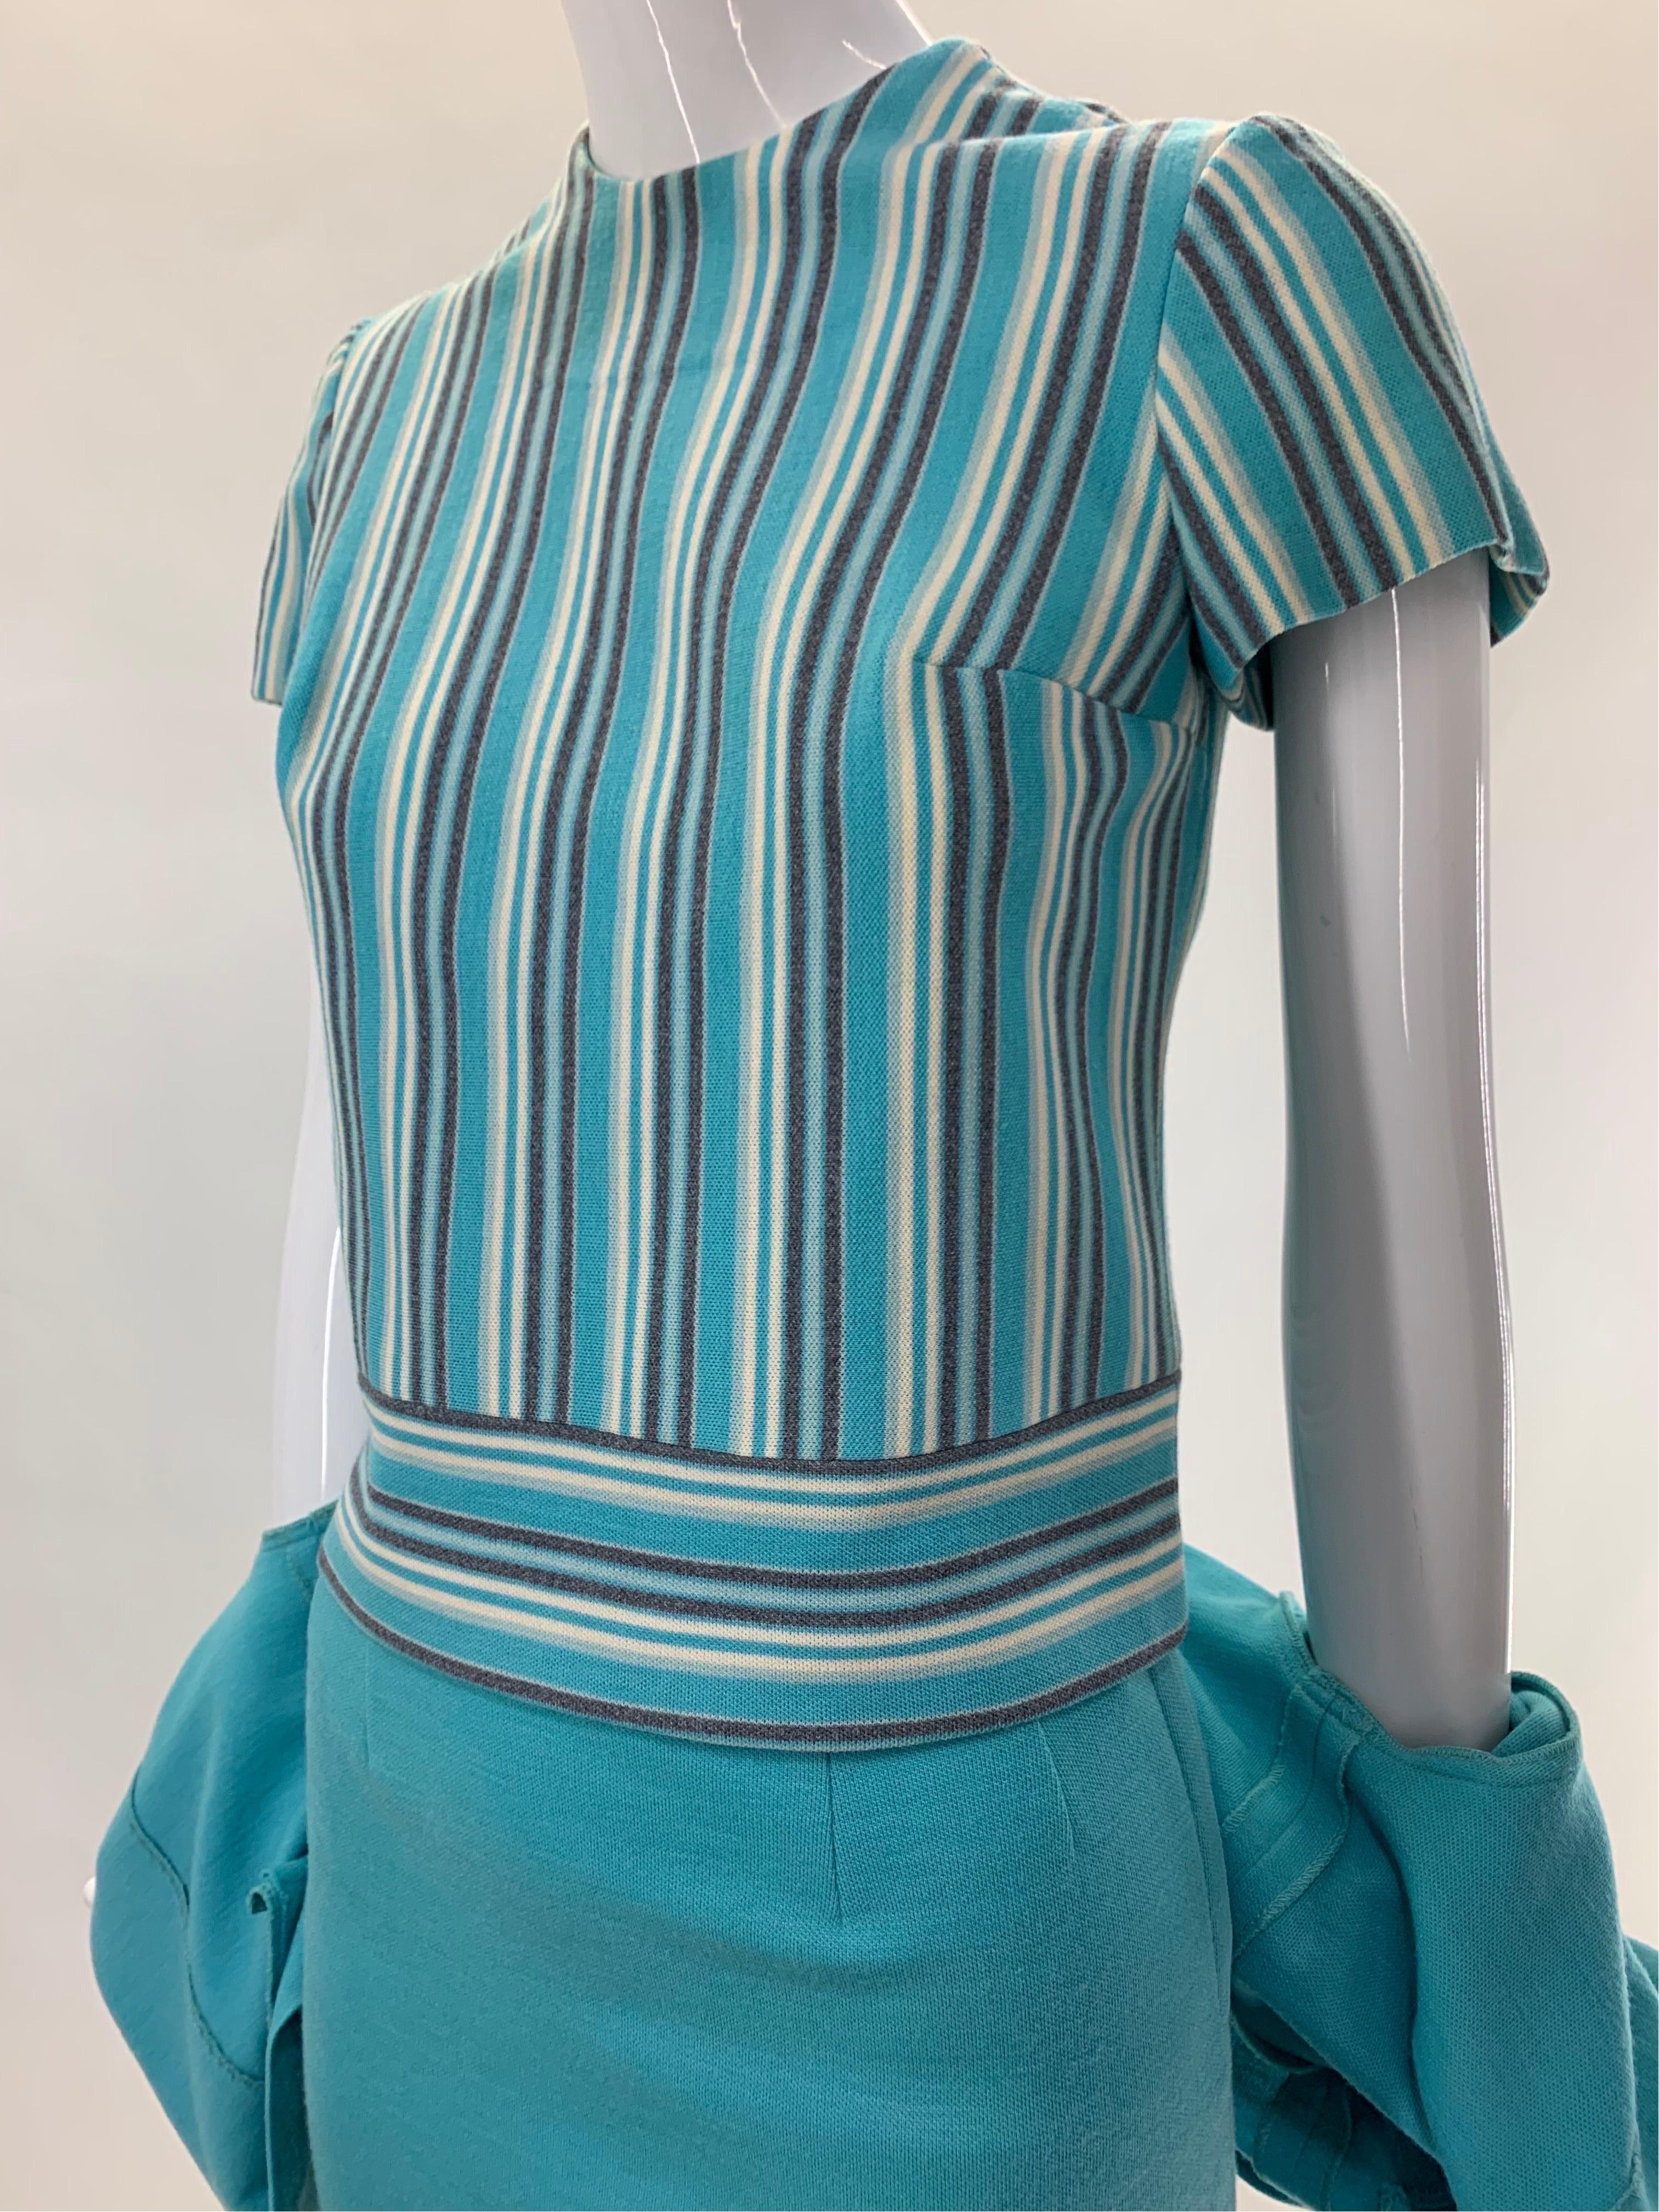 1960 Promenade - Holland Turquoise Wool Double-Knit 3-Piece Skirt Suit  For Sale 1